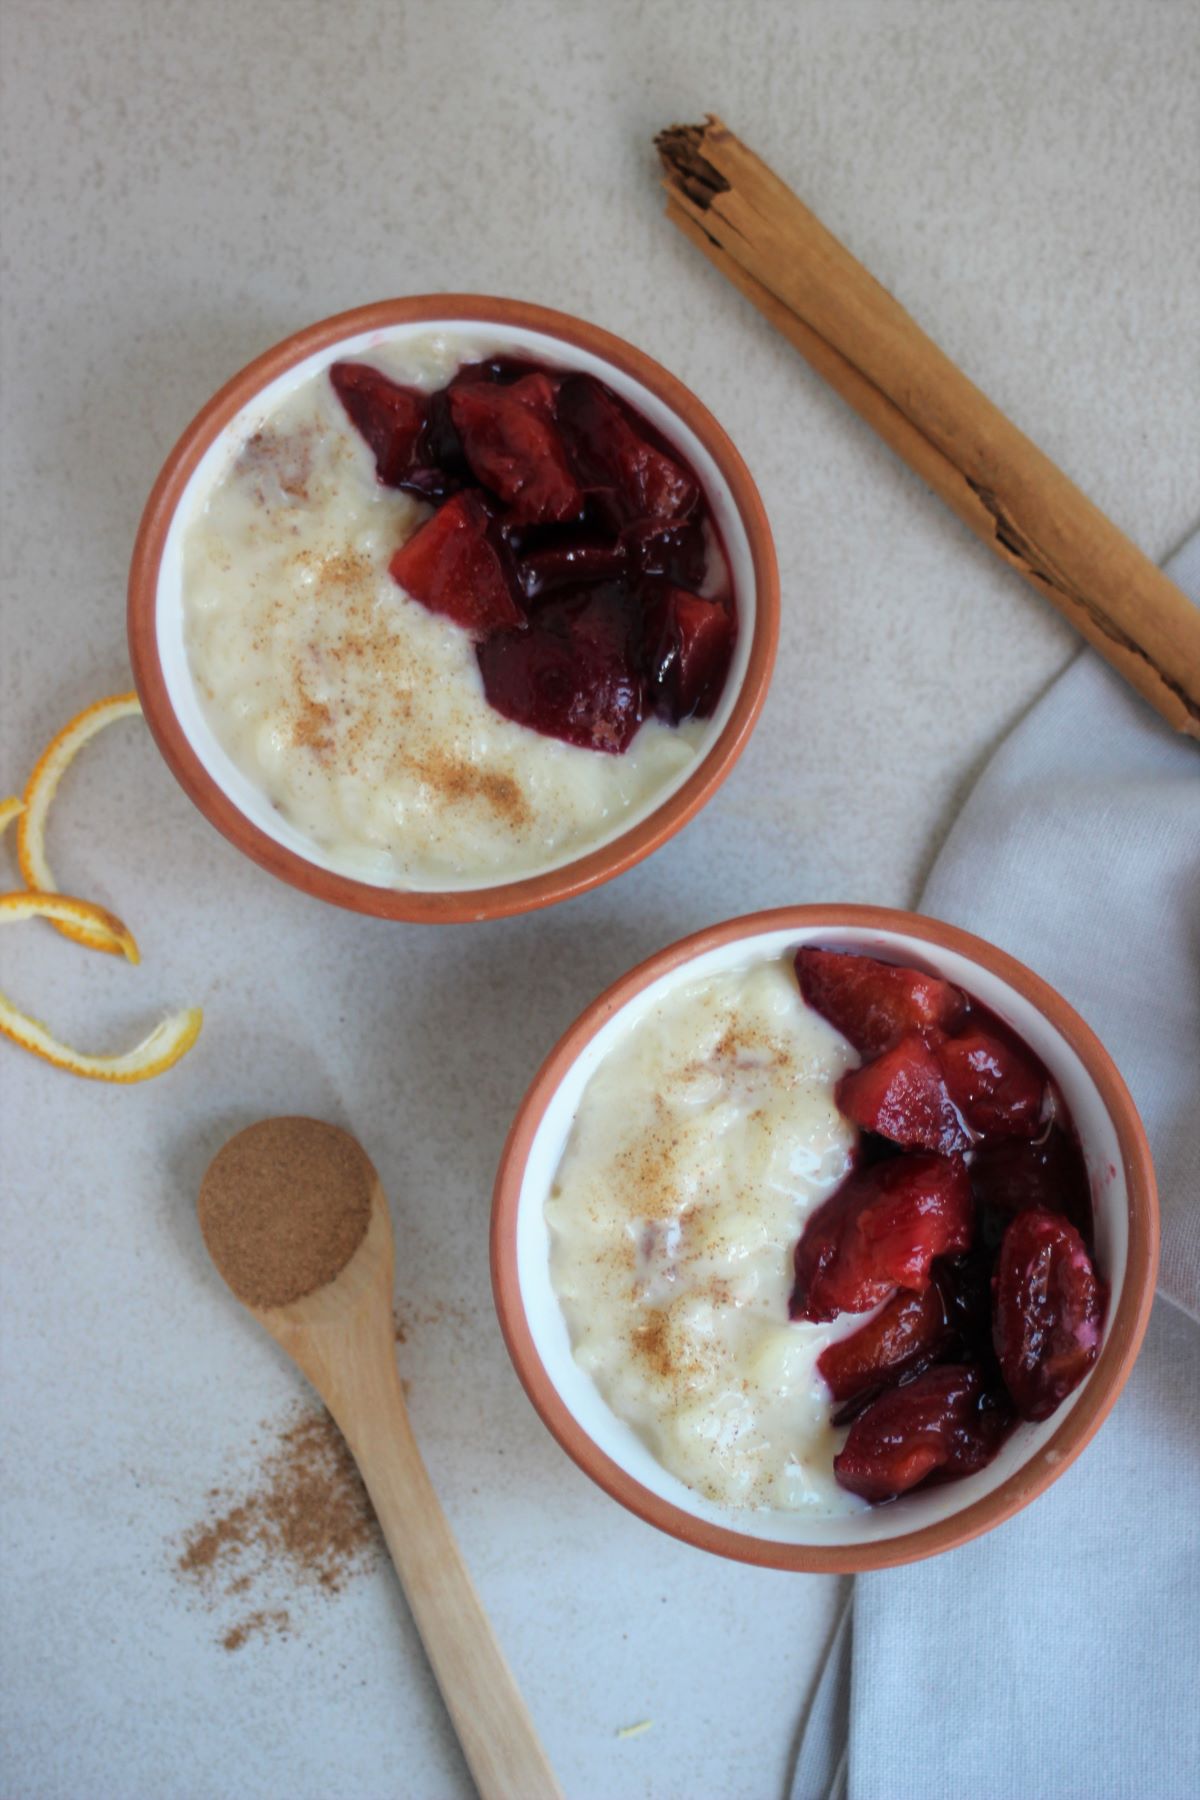 Two tiny bowls with rice pudding and plum compote seen from above. A tablespoon and a cinnamon stick.